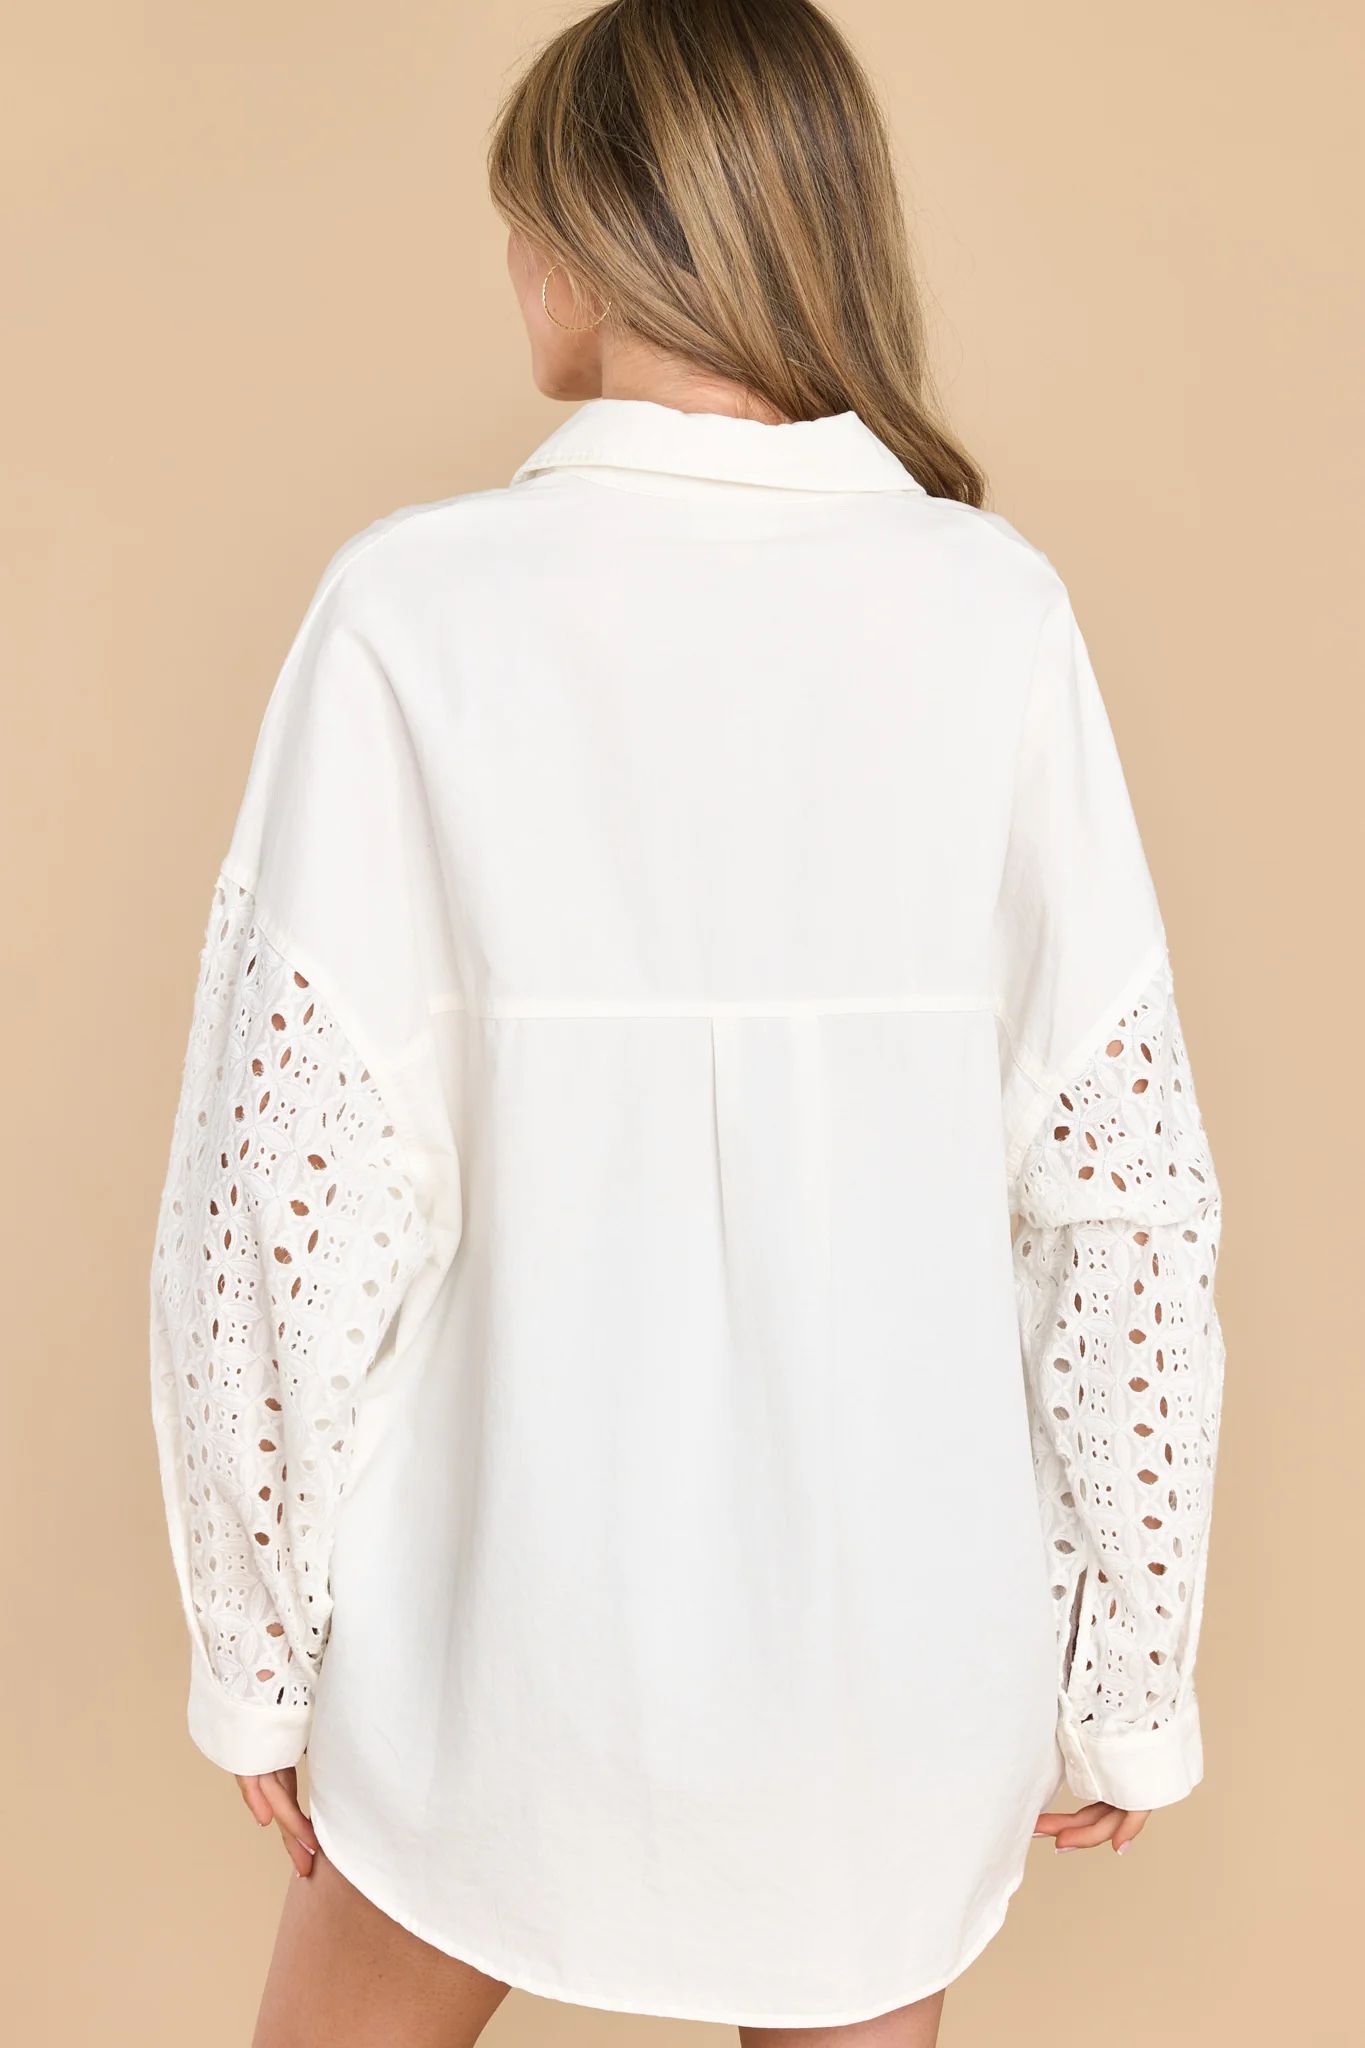 Made To Be Magnificent White Eyelet Top | Red Dress 